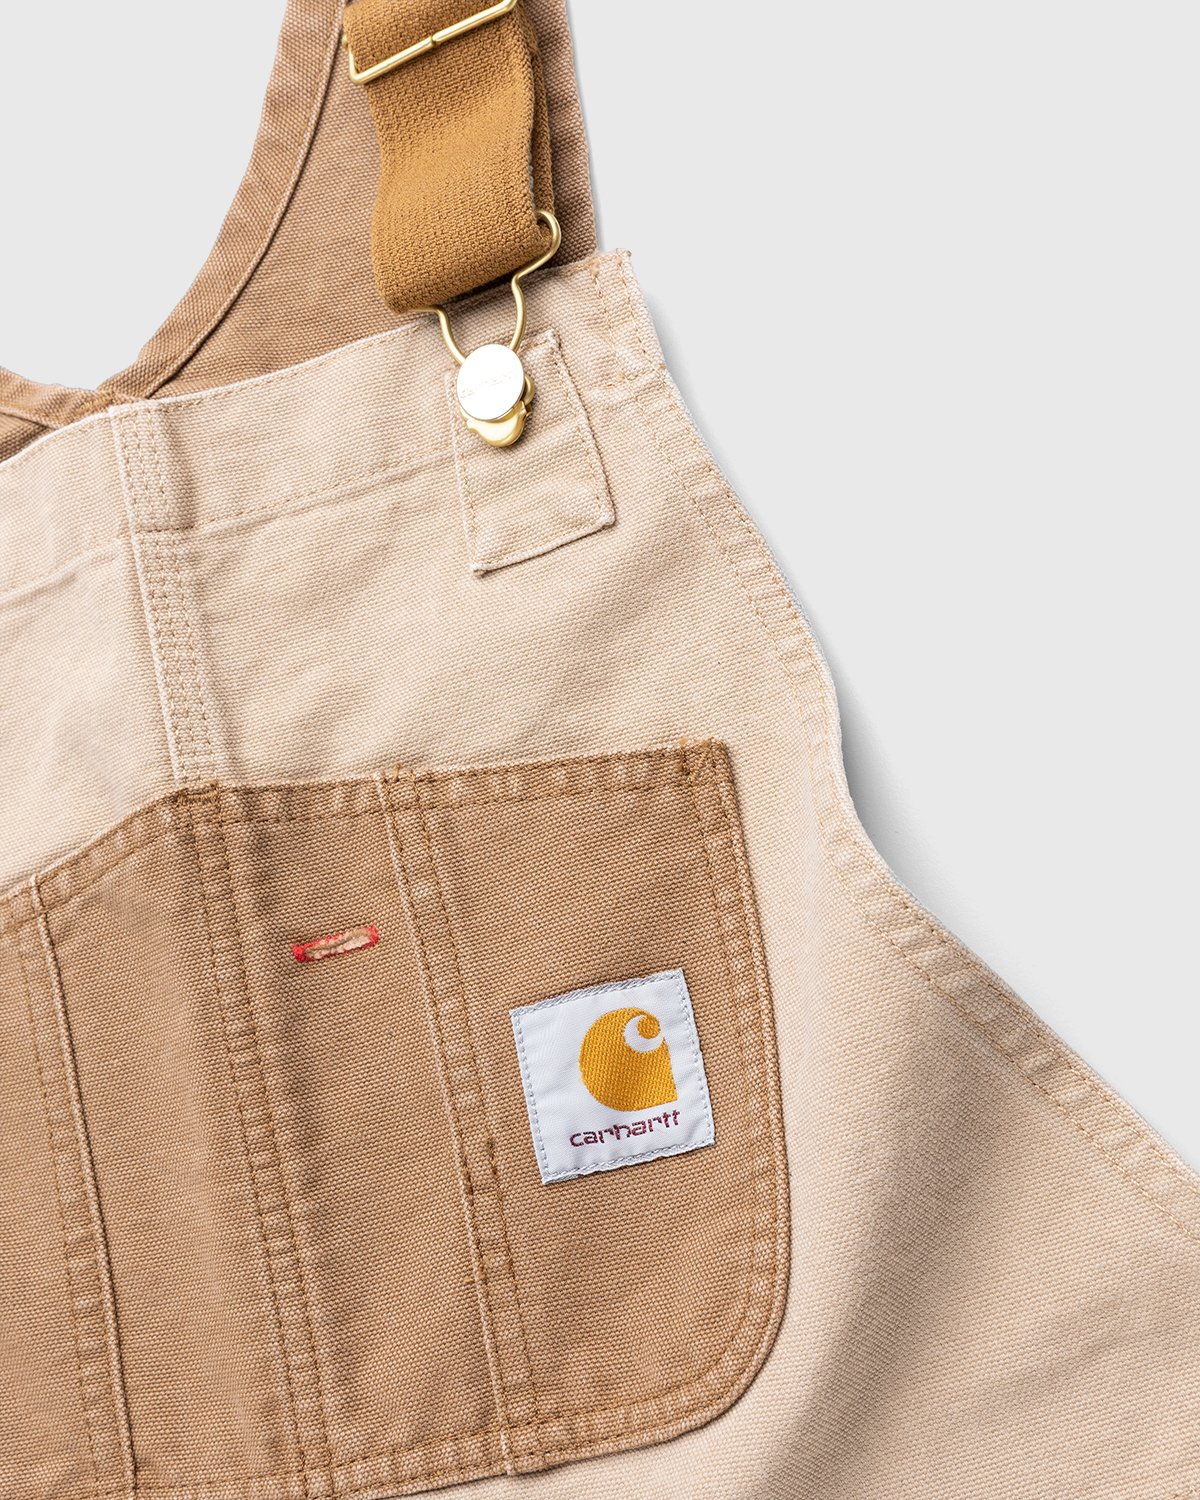 Carhartt WIP - Double Knee Bib Overall Dust Hamilton Brown - Clothing - Brown - Image 3